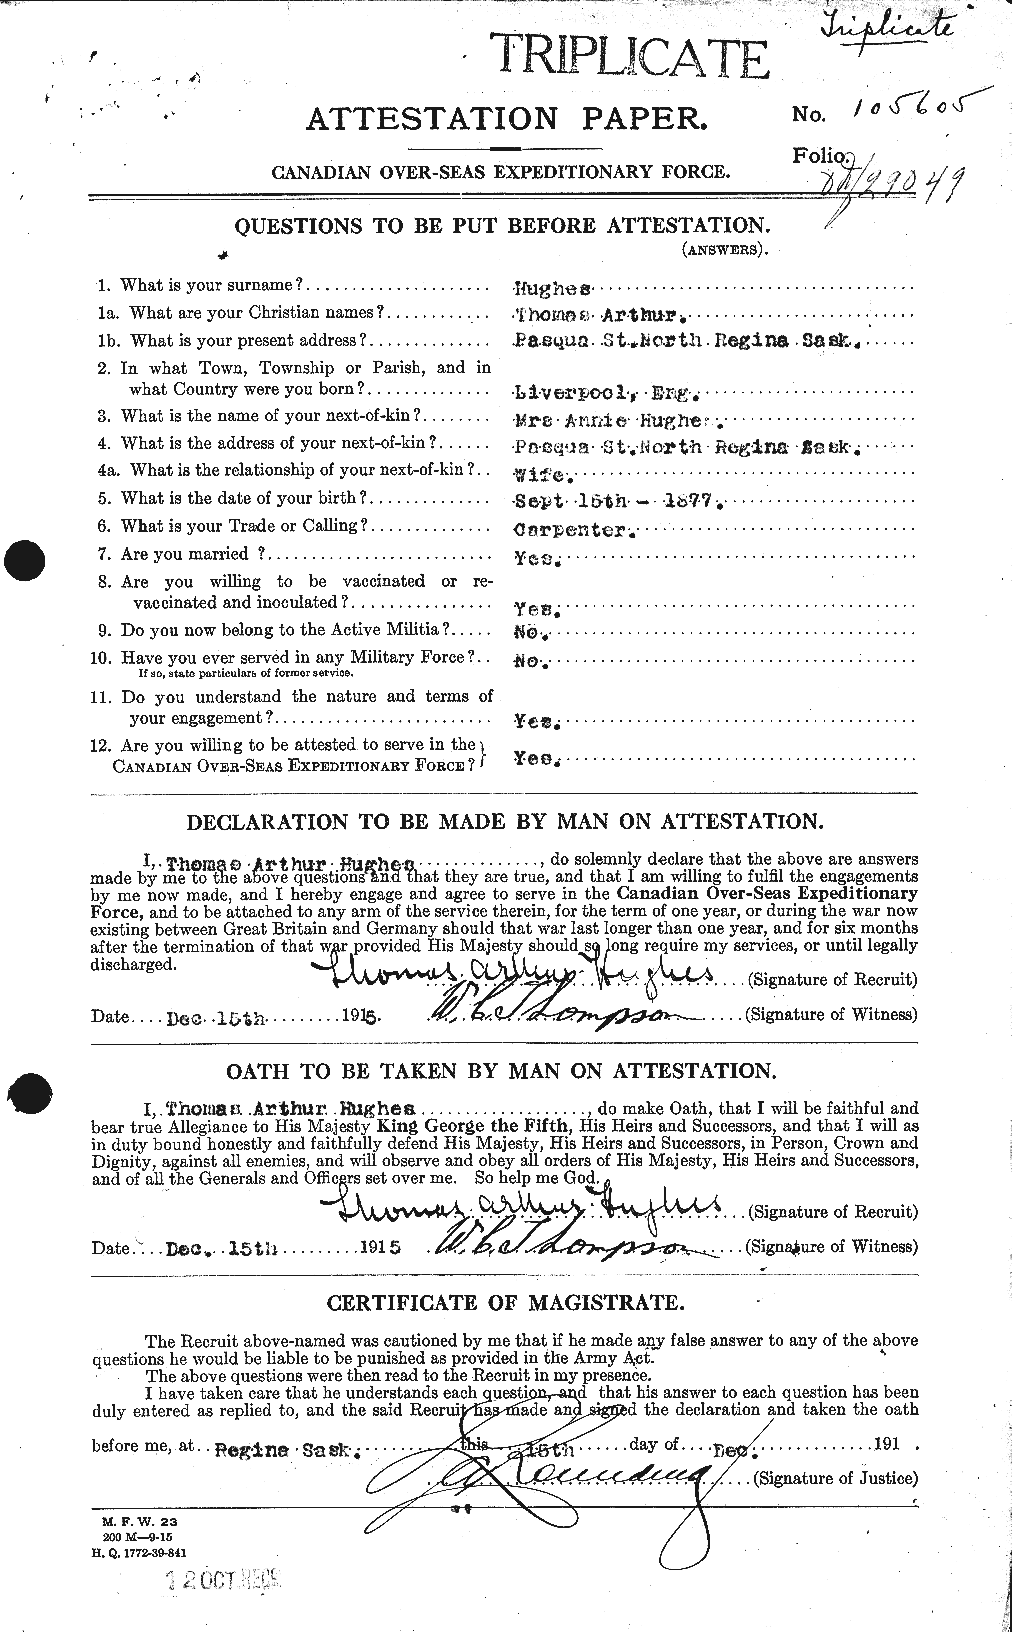 Personnel Records of the First World War - CEF 405825a